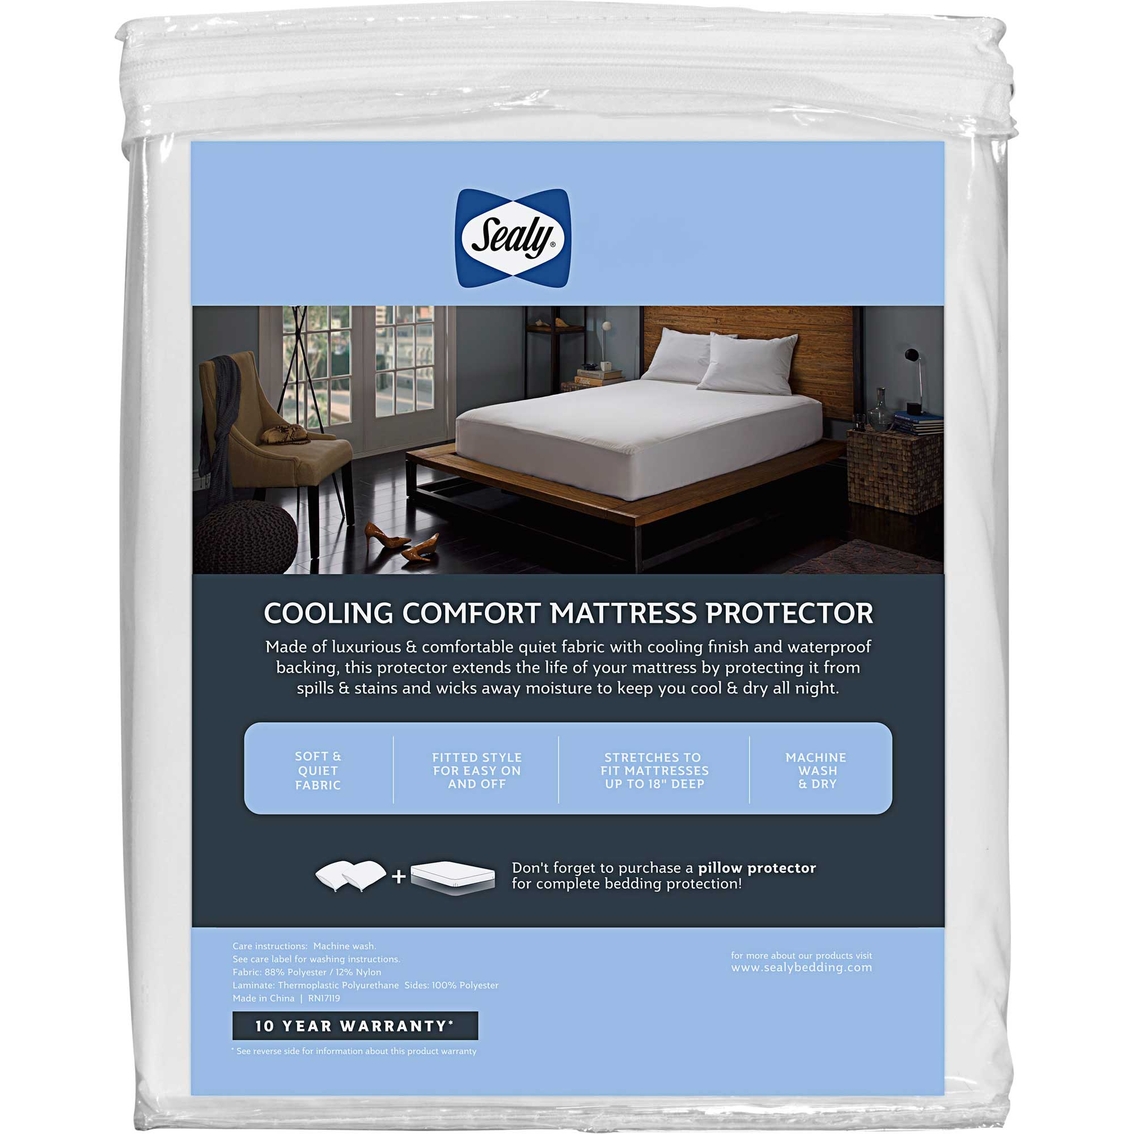 Sealy Cool Comfort Mattress Protector - Image 2 of 4